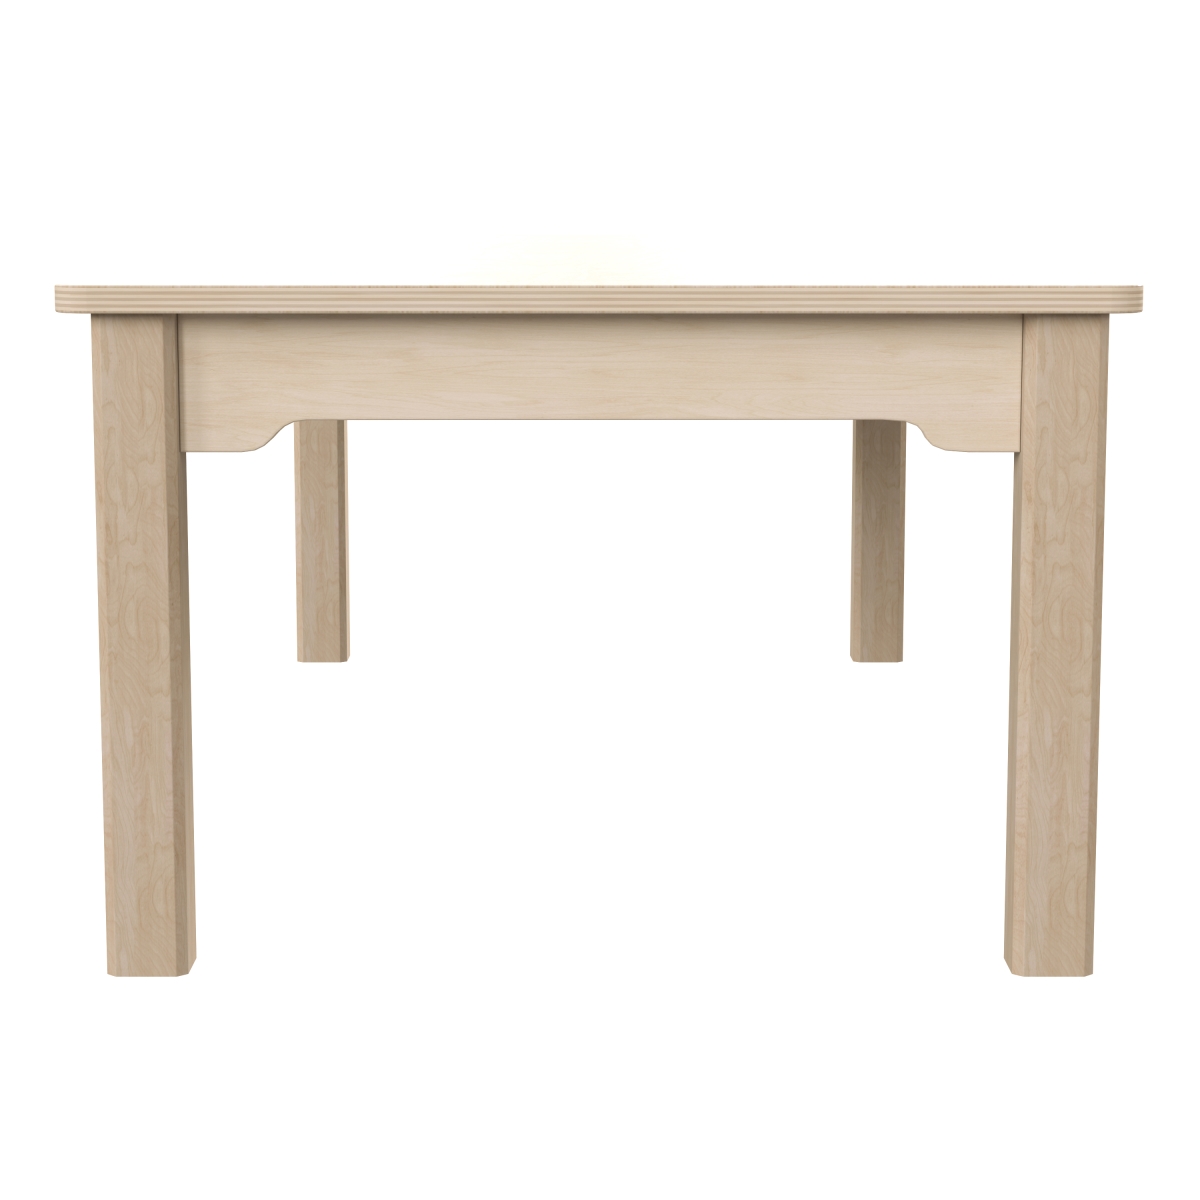 Picture of Flash Furniture MK-ME088010-GG 23.5 x 47.25 x 14.5 in. Bright Beginnings Commercial Grade Wooden Rectangular Preschool Classroom Activity Table, Beech